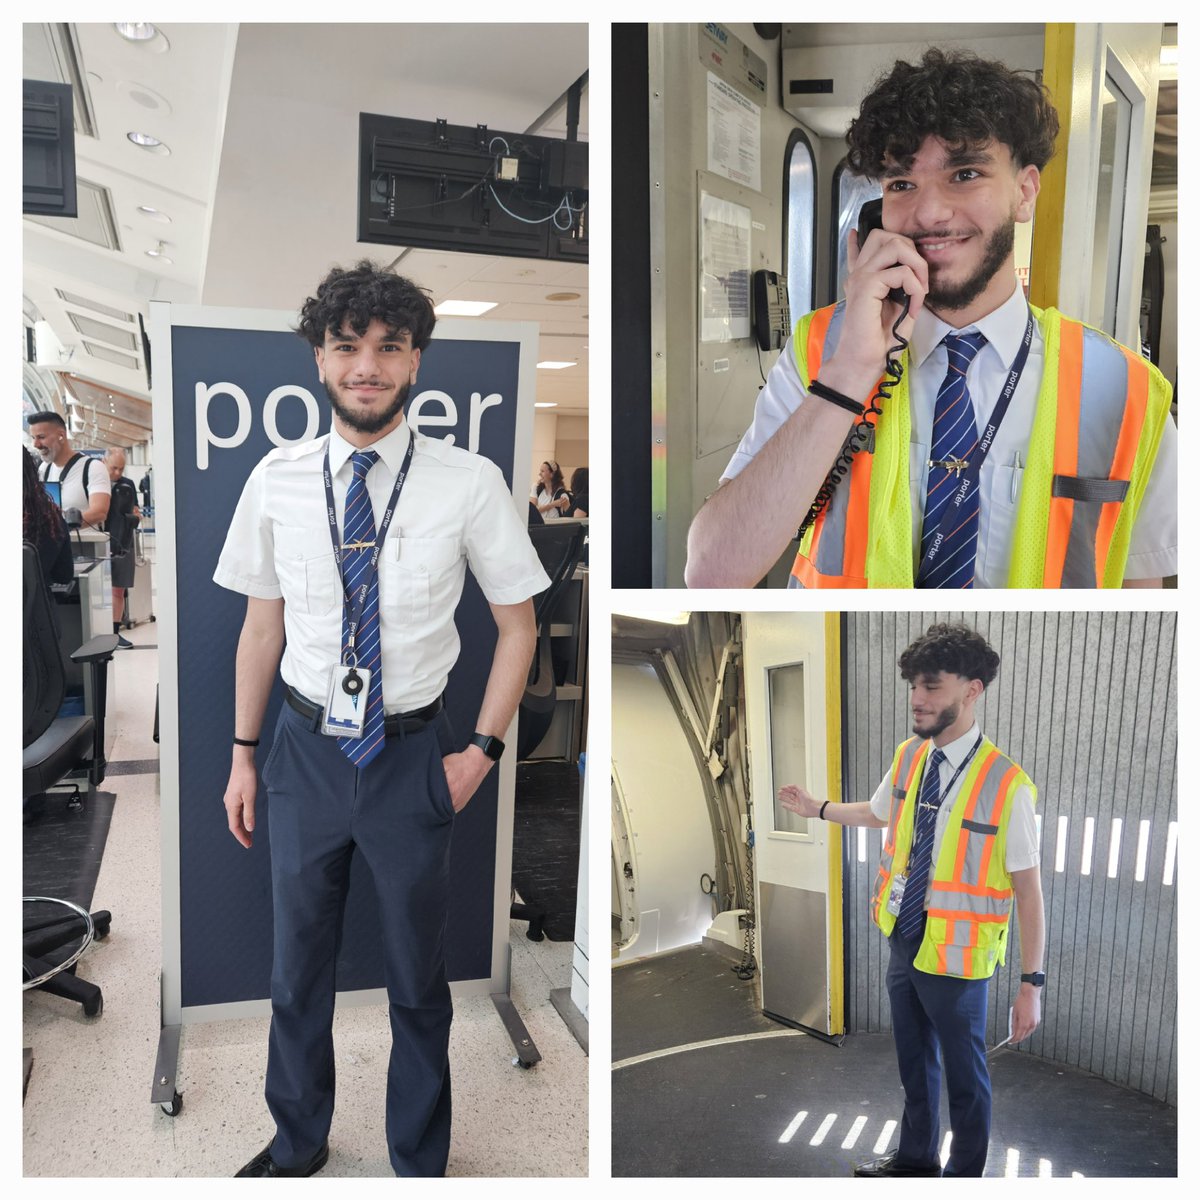 ' Shout out to coop student Kareem Sinno , completing his 4 credit co-op at Porter Airlines and showing his ability to board passengers , and operate the passenger boarding bridge!  #DPCDSB #coop'